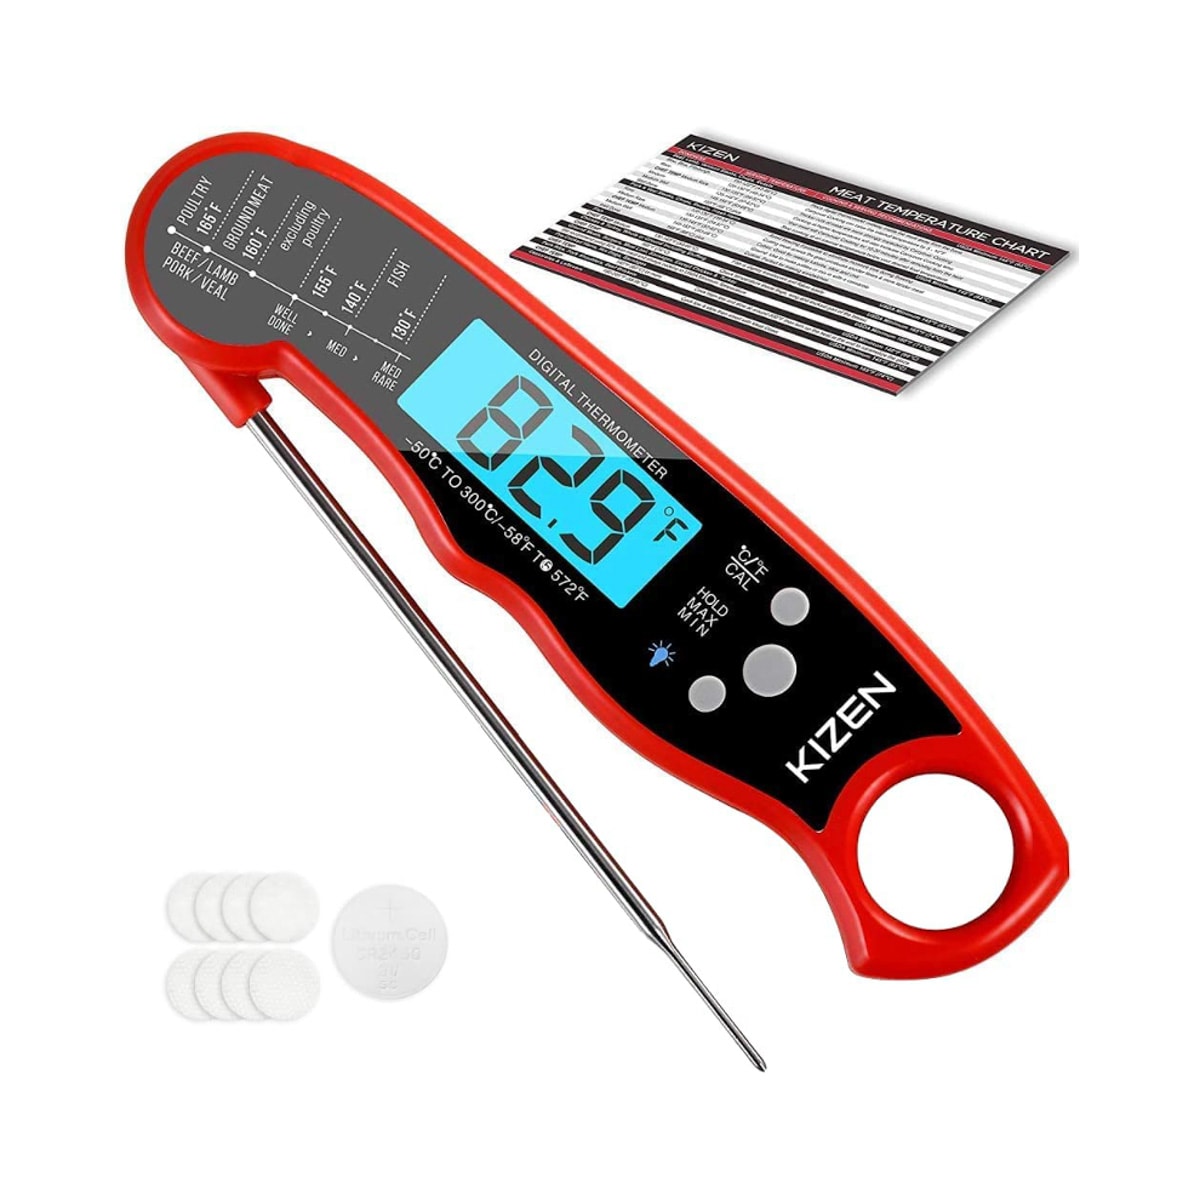 Digital meat thermometer with probe.